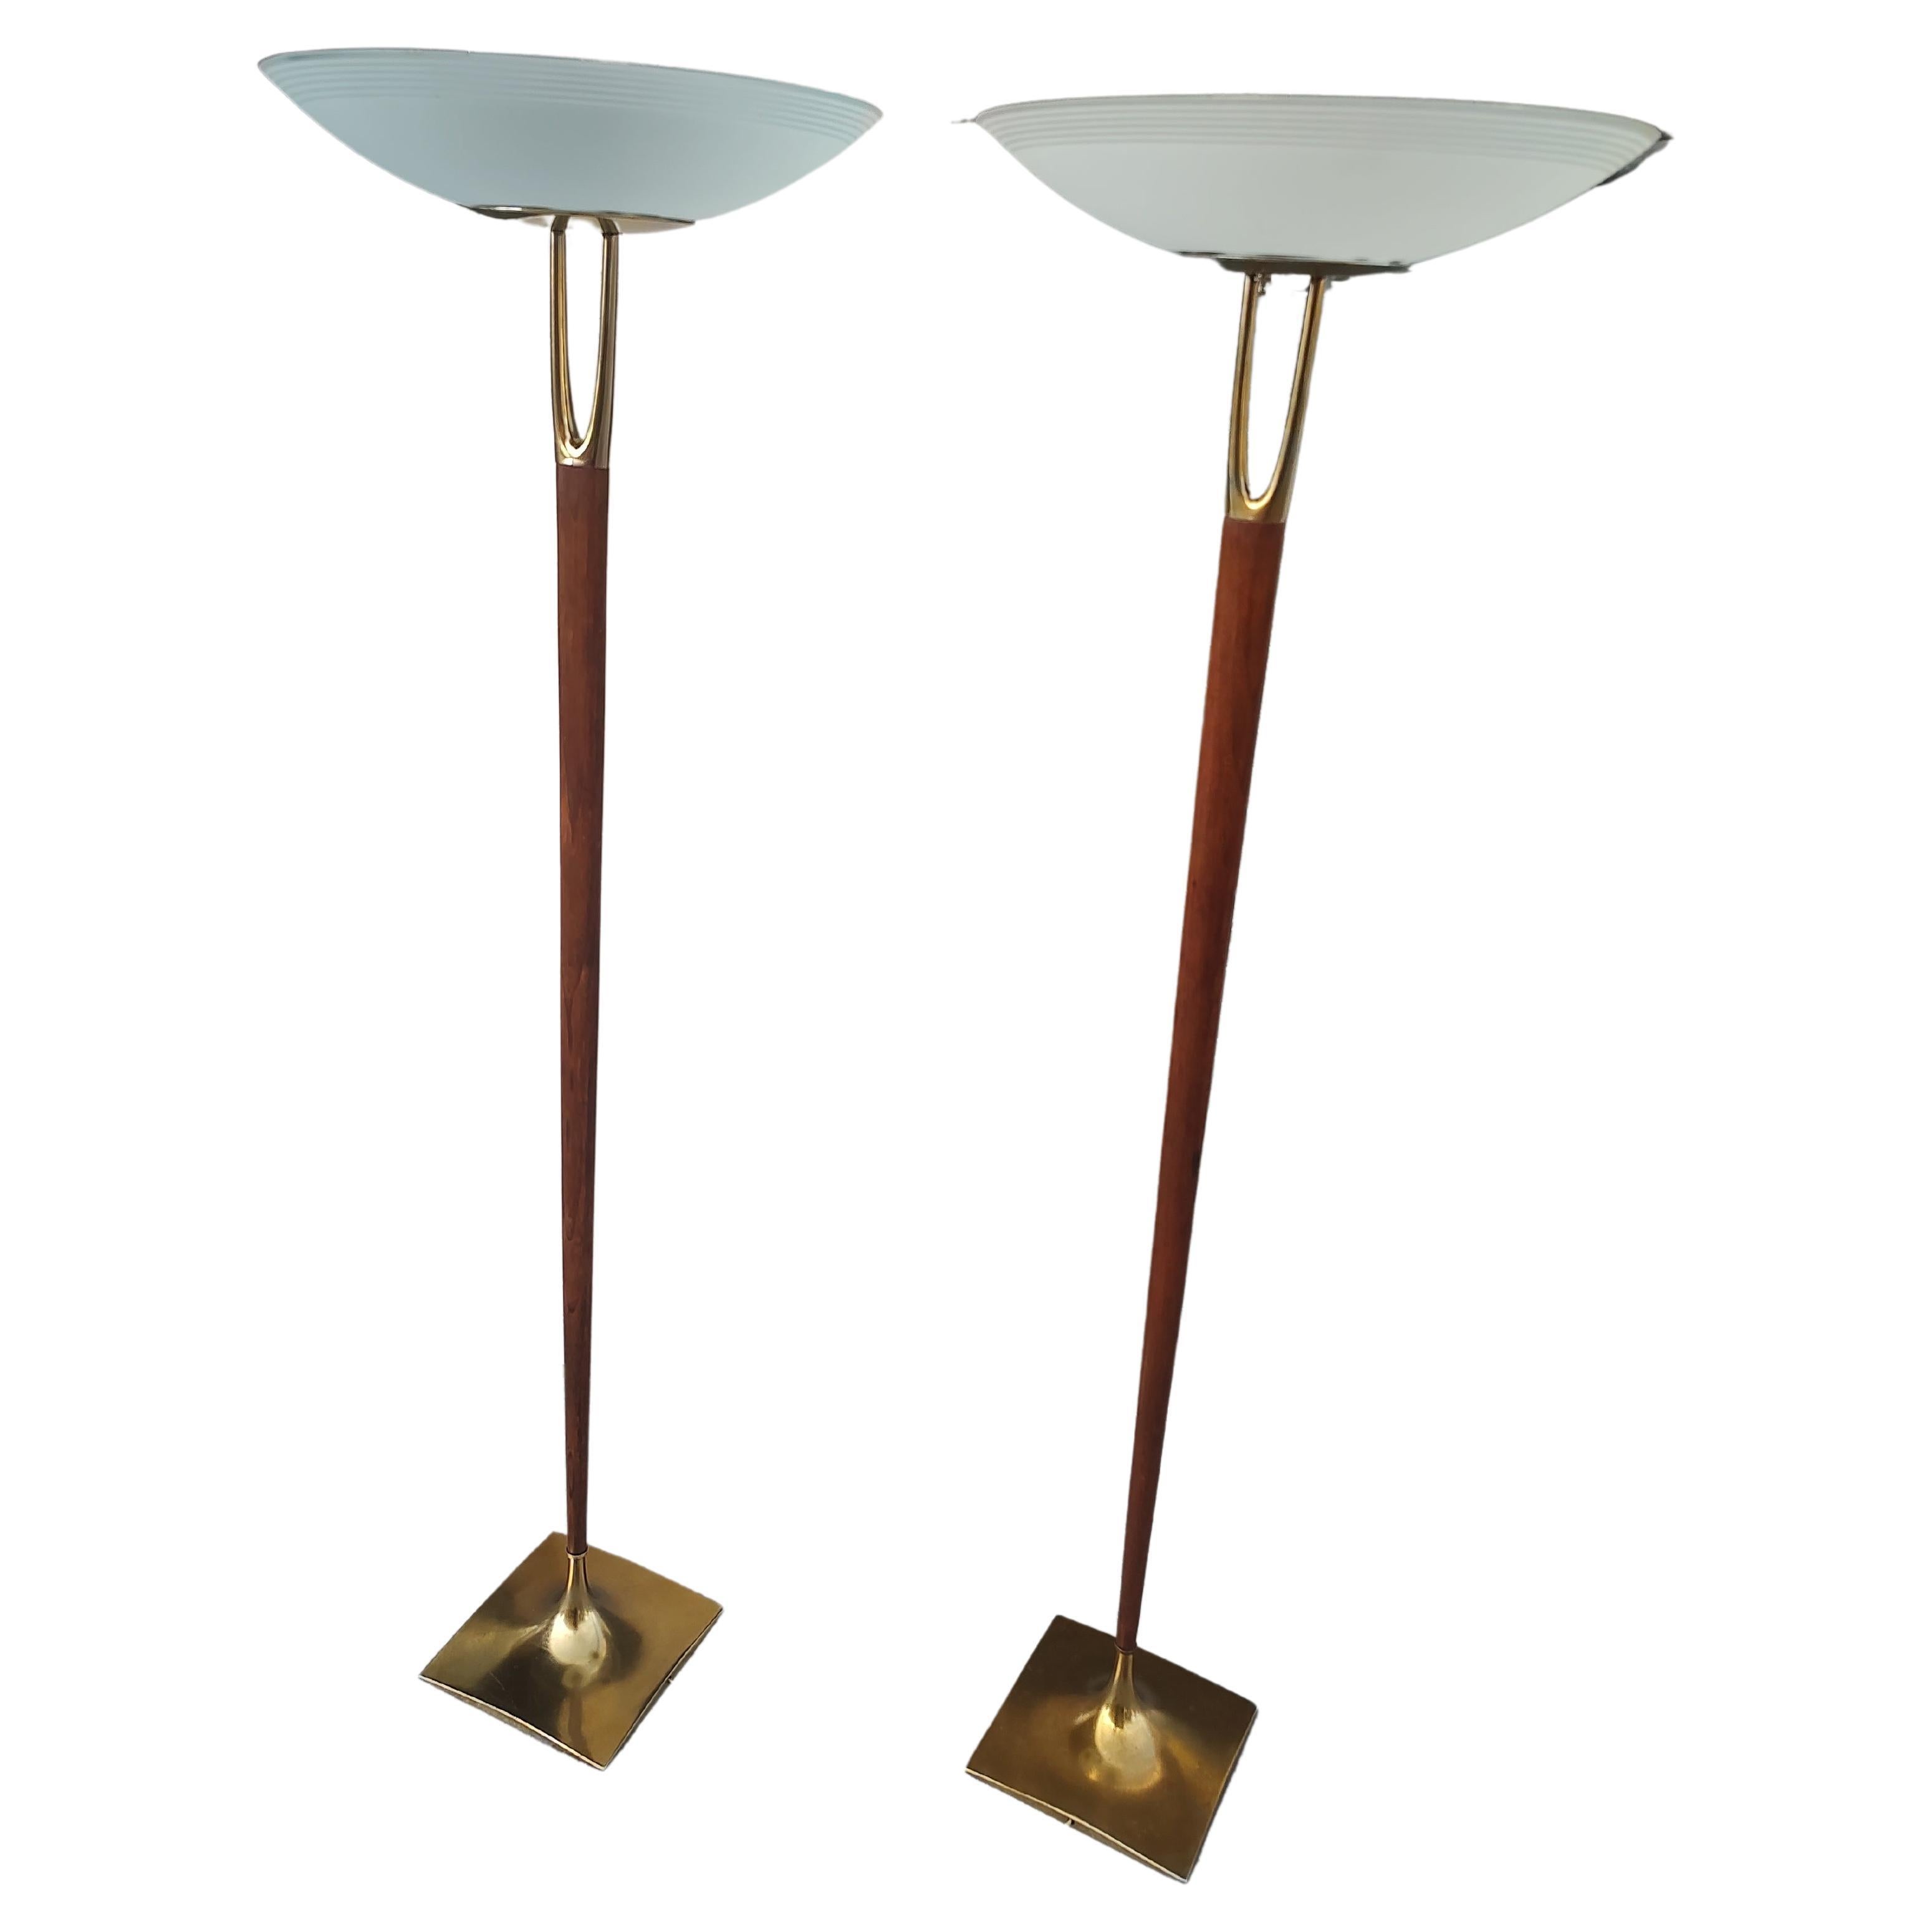 Pair of Mid Century Modern Wishbone Floor Lamps by Gerald Thurston for Laurel For Sale